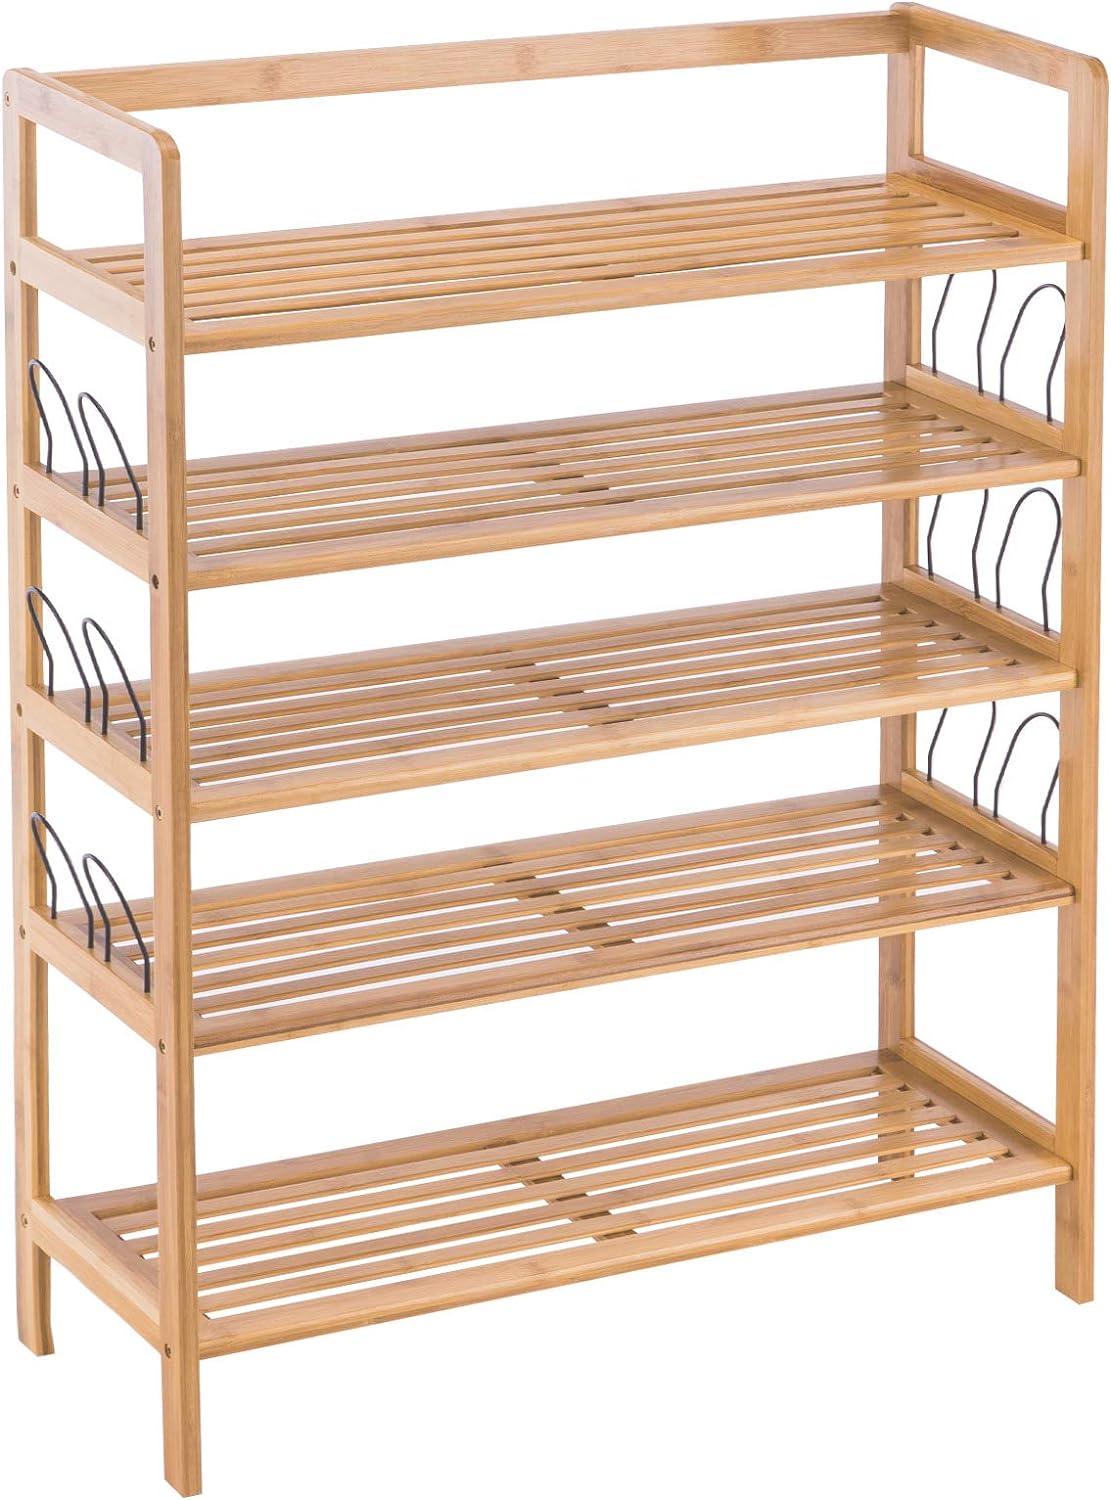 YOUDENOVA Bamboo Shoe Rack,5 Tier Wooden Shoe Shelf Storage Organizer,Perfect for Entryway,Hallway,Closet or Living Room (Natural Bamboo)